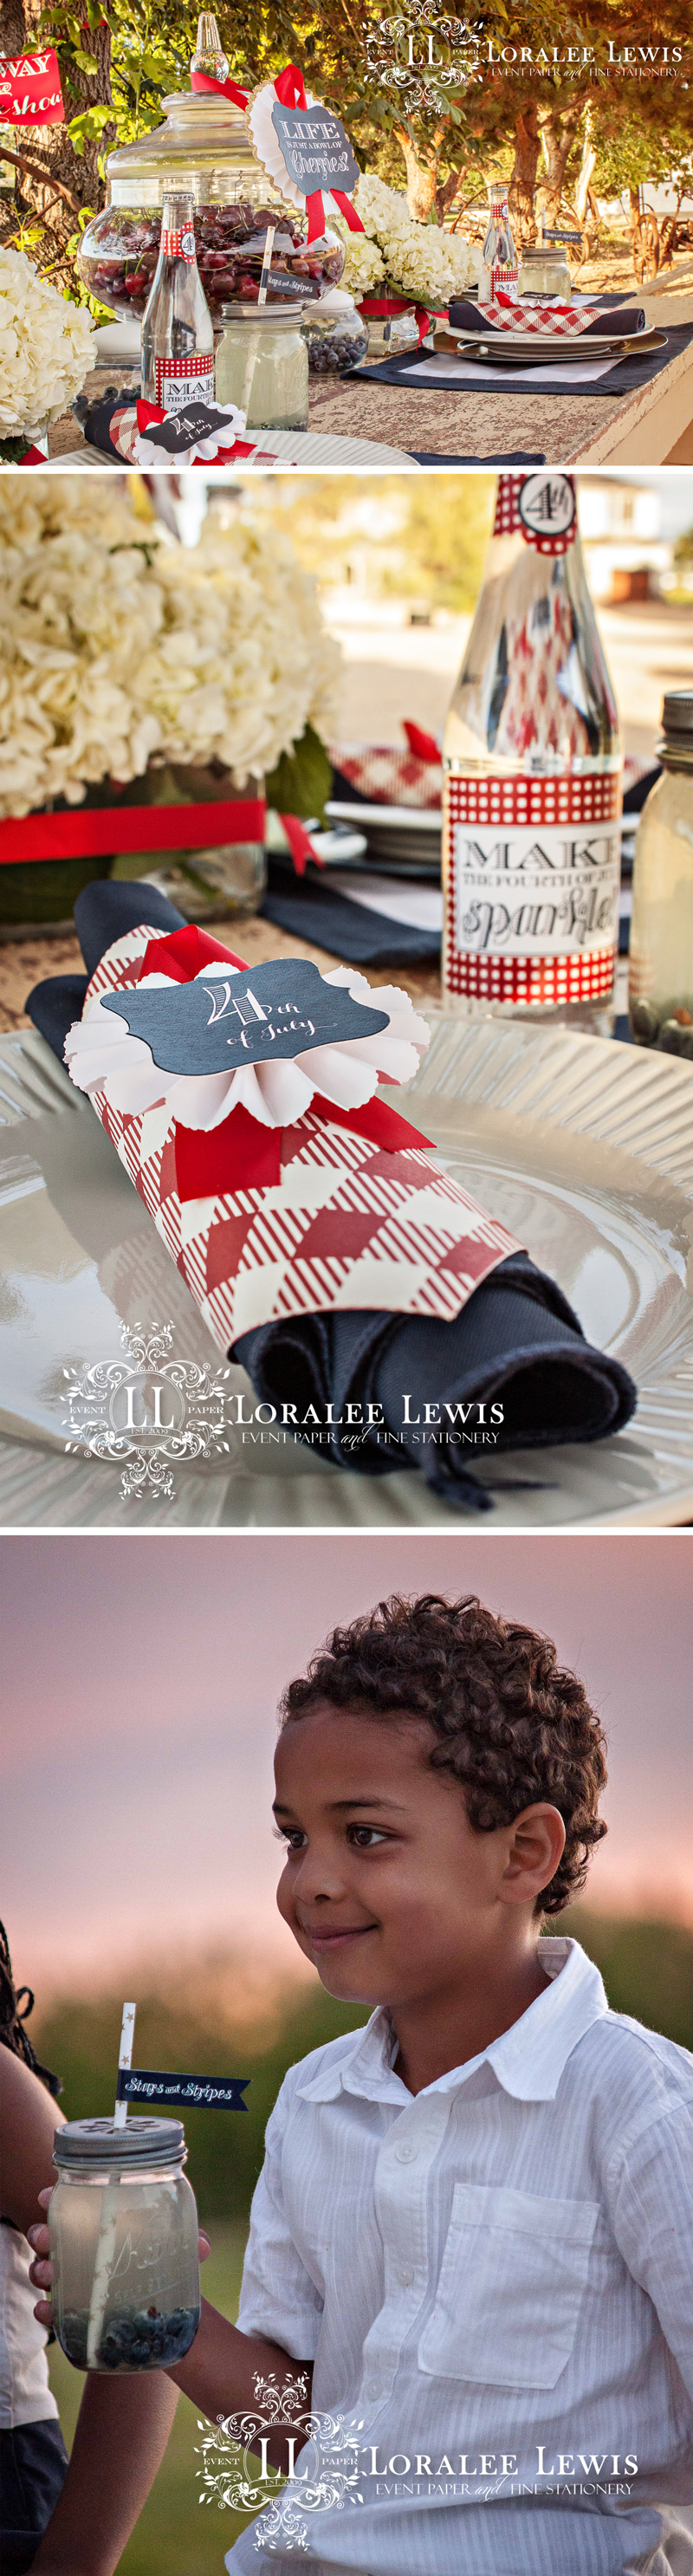 LoraleeLewis-American-Collection13